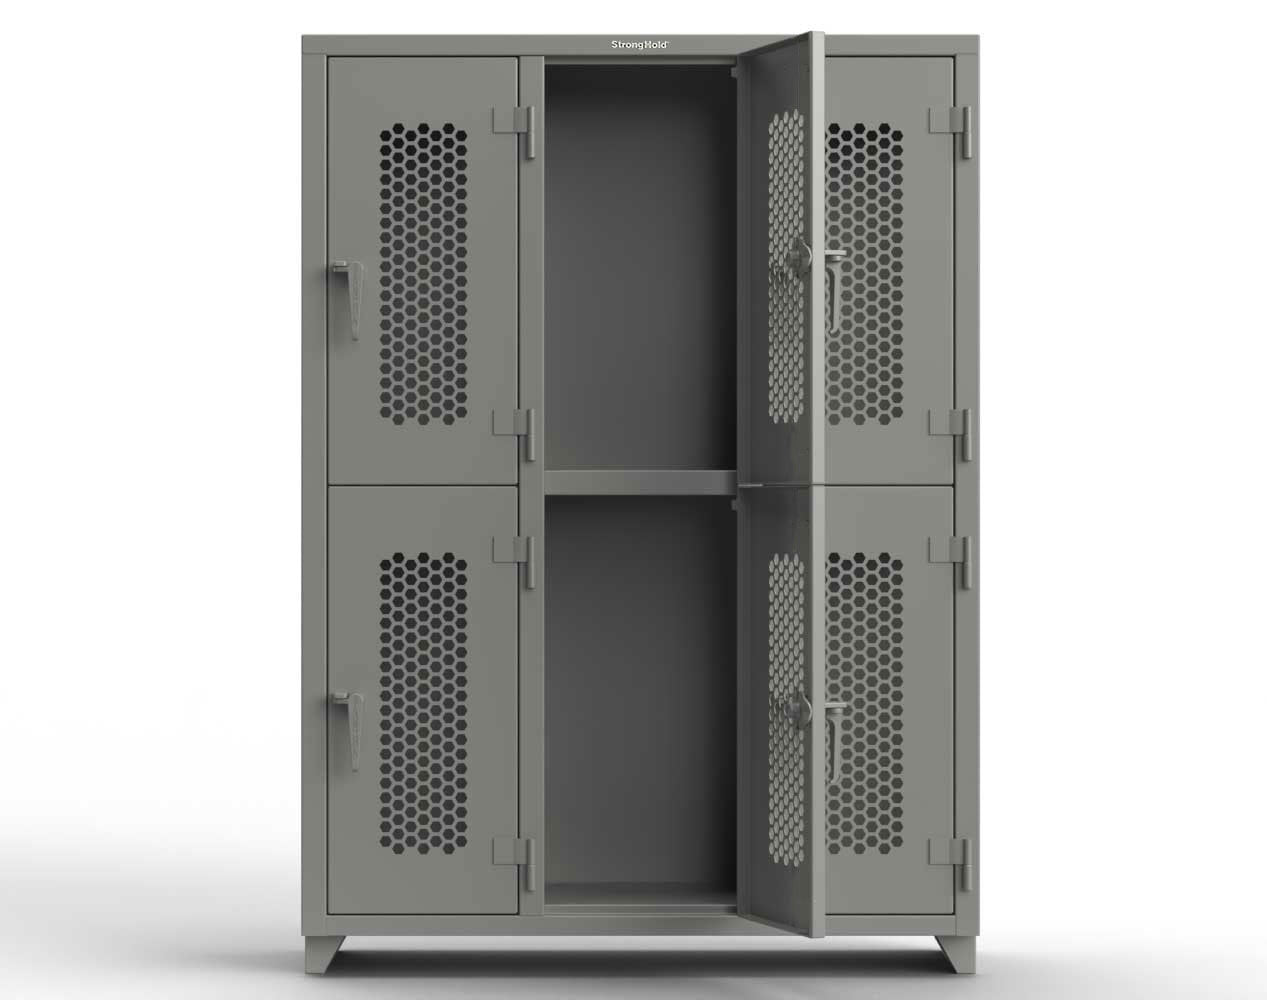 Extra Heavy Duty 14 GA Double-Tier Ventilated Locker, 6 Compartments - 54 in. W x 18 in. D x 75 in. H